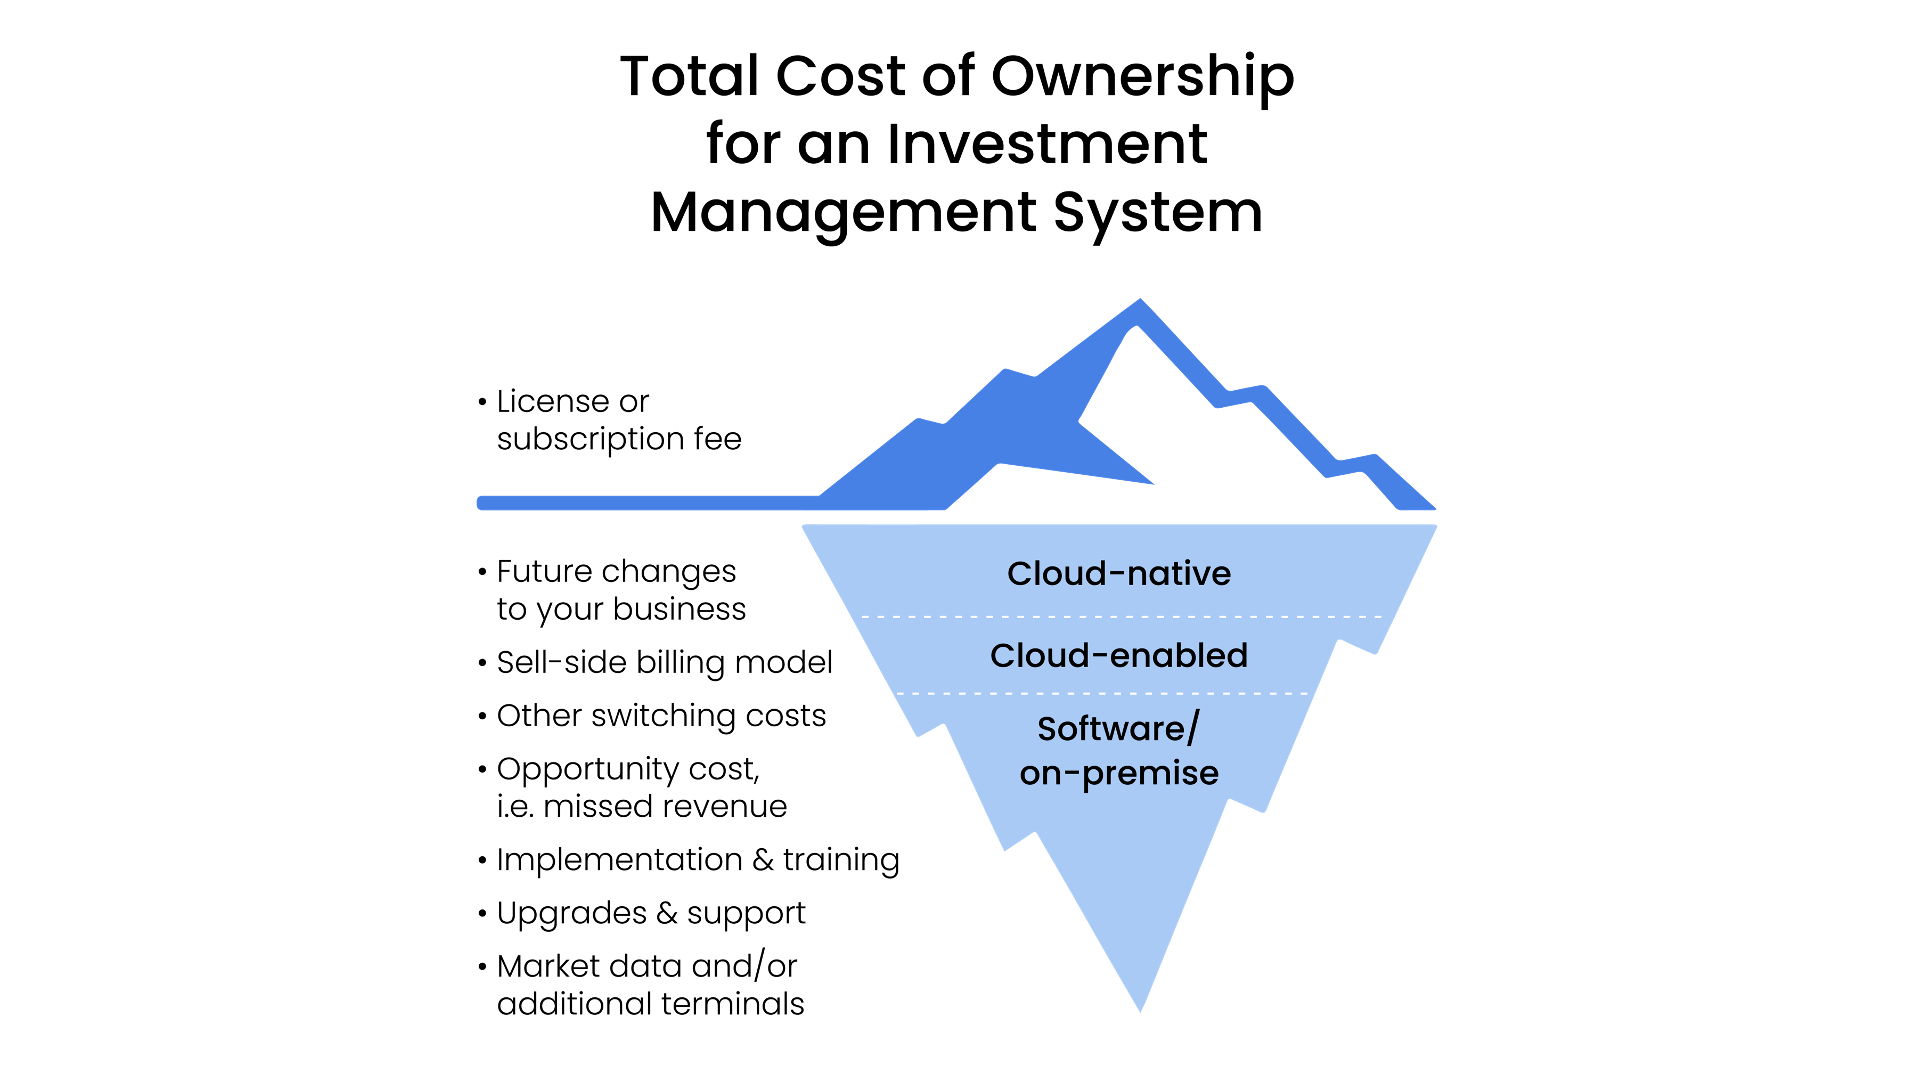 Total Cost of Ownership might be higher for an established vendor than an emerging vendor